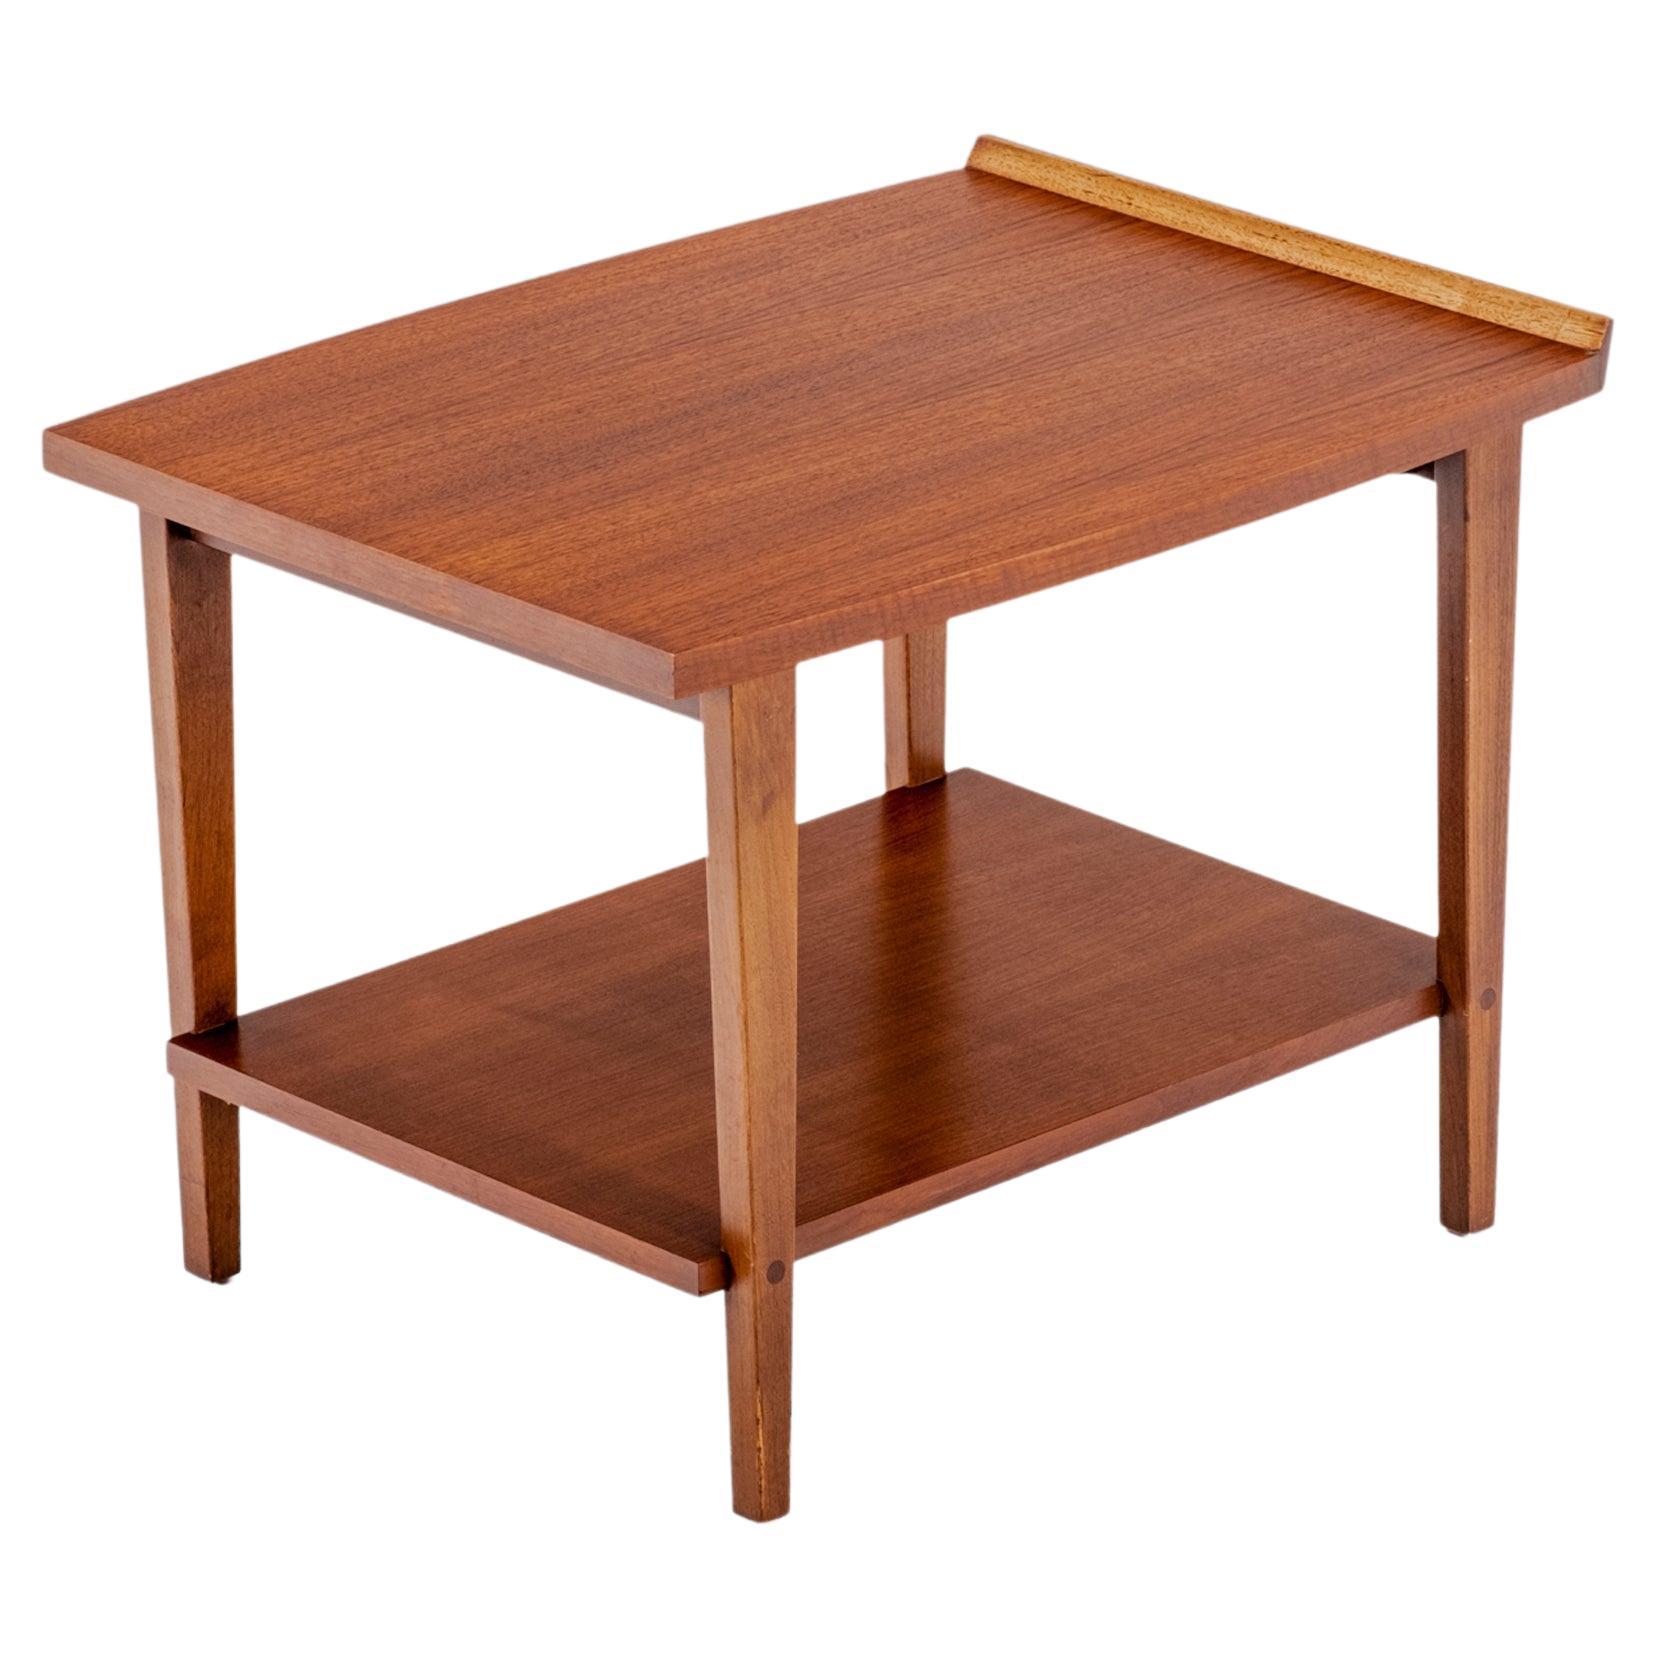 Mid-Century Modern Two Tiered End Table / Side Table by Lane, USA, C. 1960's